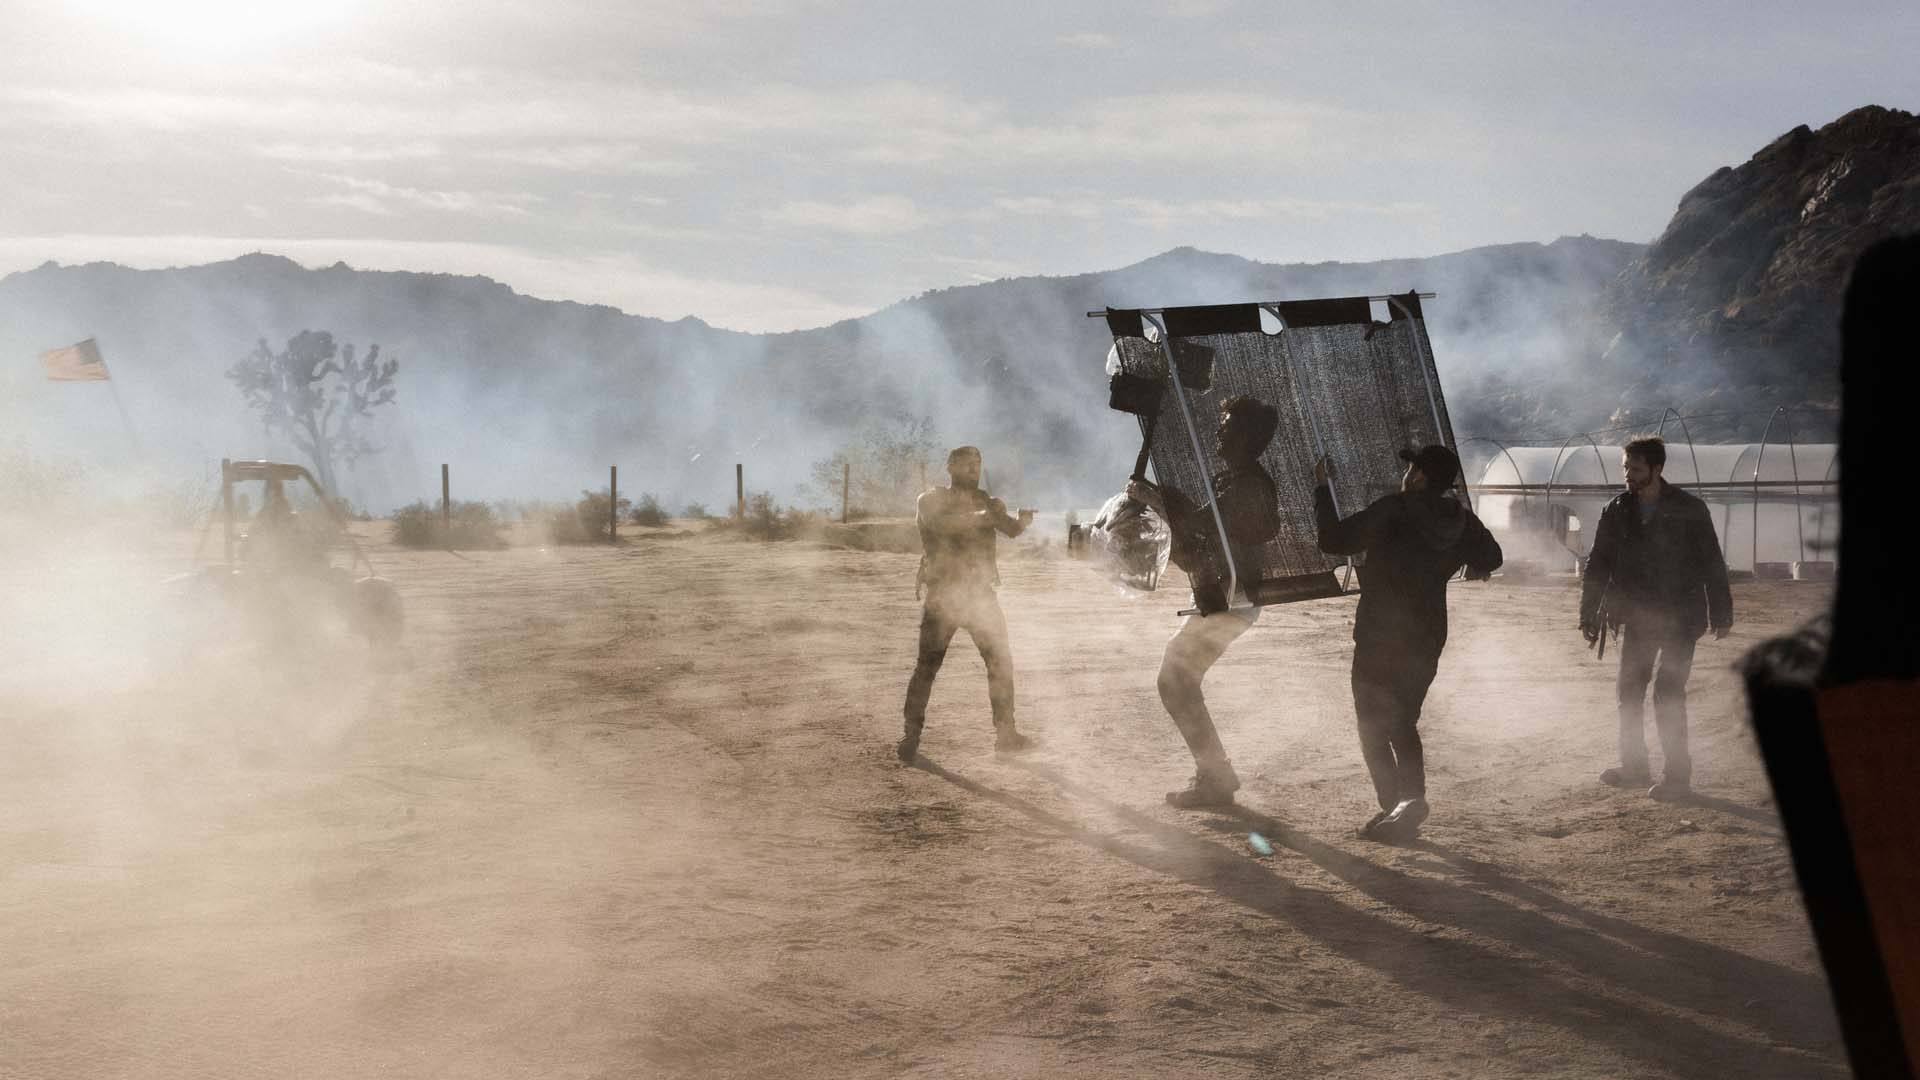 Dusty action film location with film crew and actors